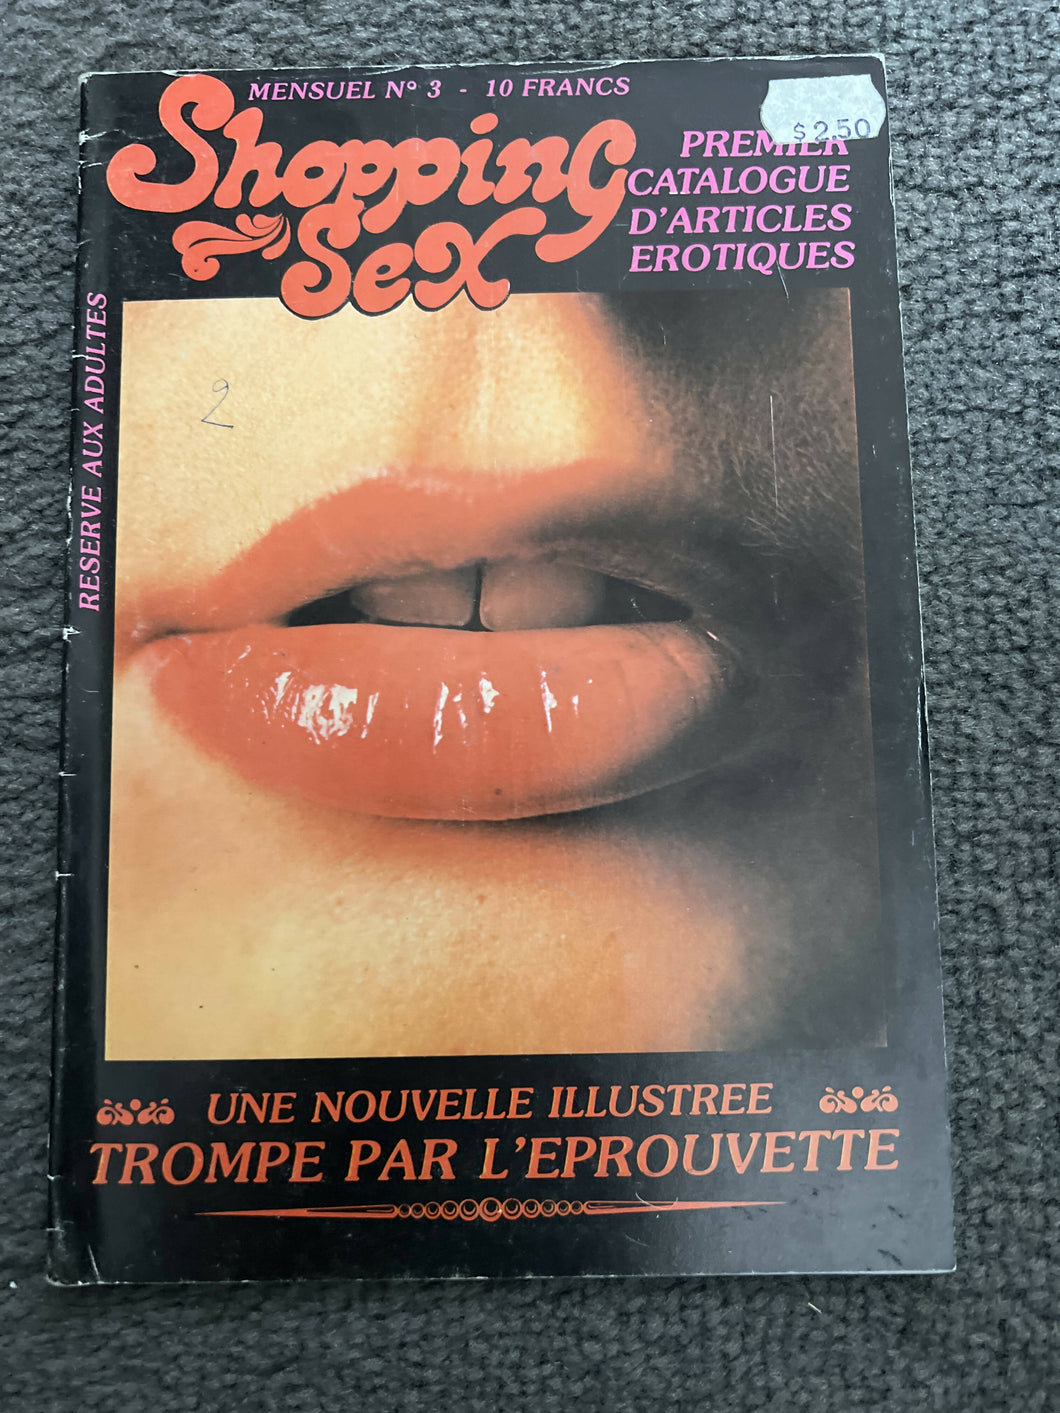 Copy of Very rare #5 Photo novel and catalog of vintage erotica shopping sex France Diane Diffusion